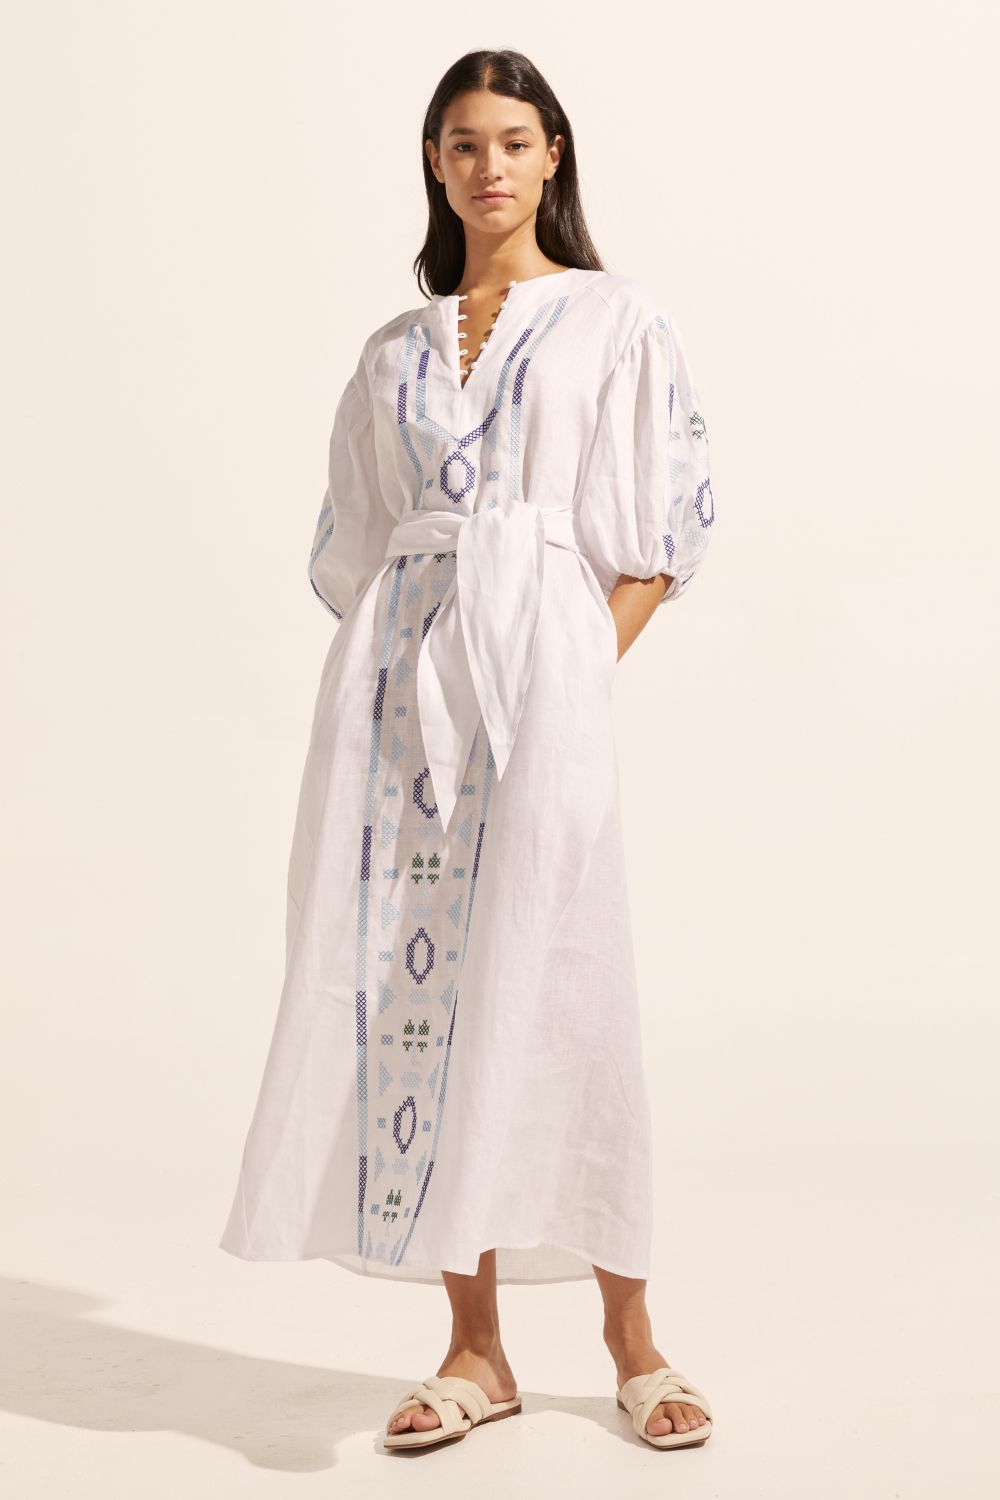 white and blue, maxi dress, embroidery, mid length sleeve, self tie fabric belt, front view